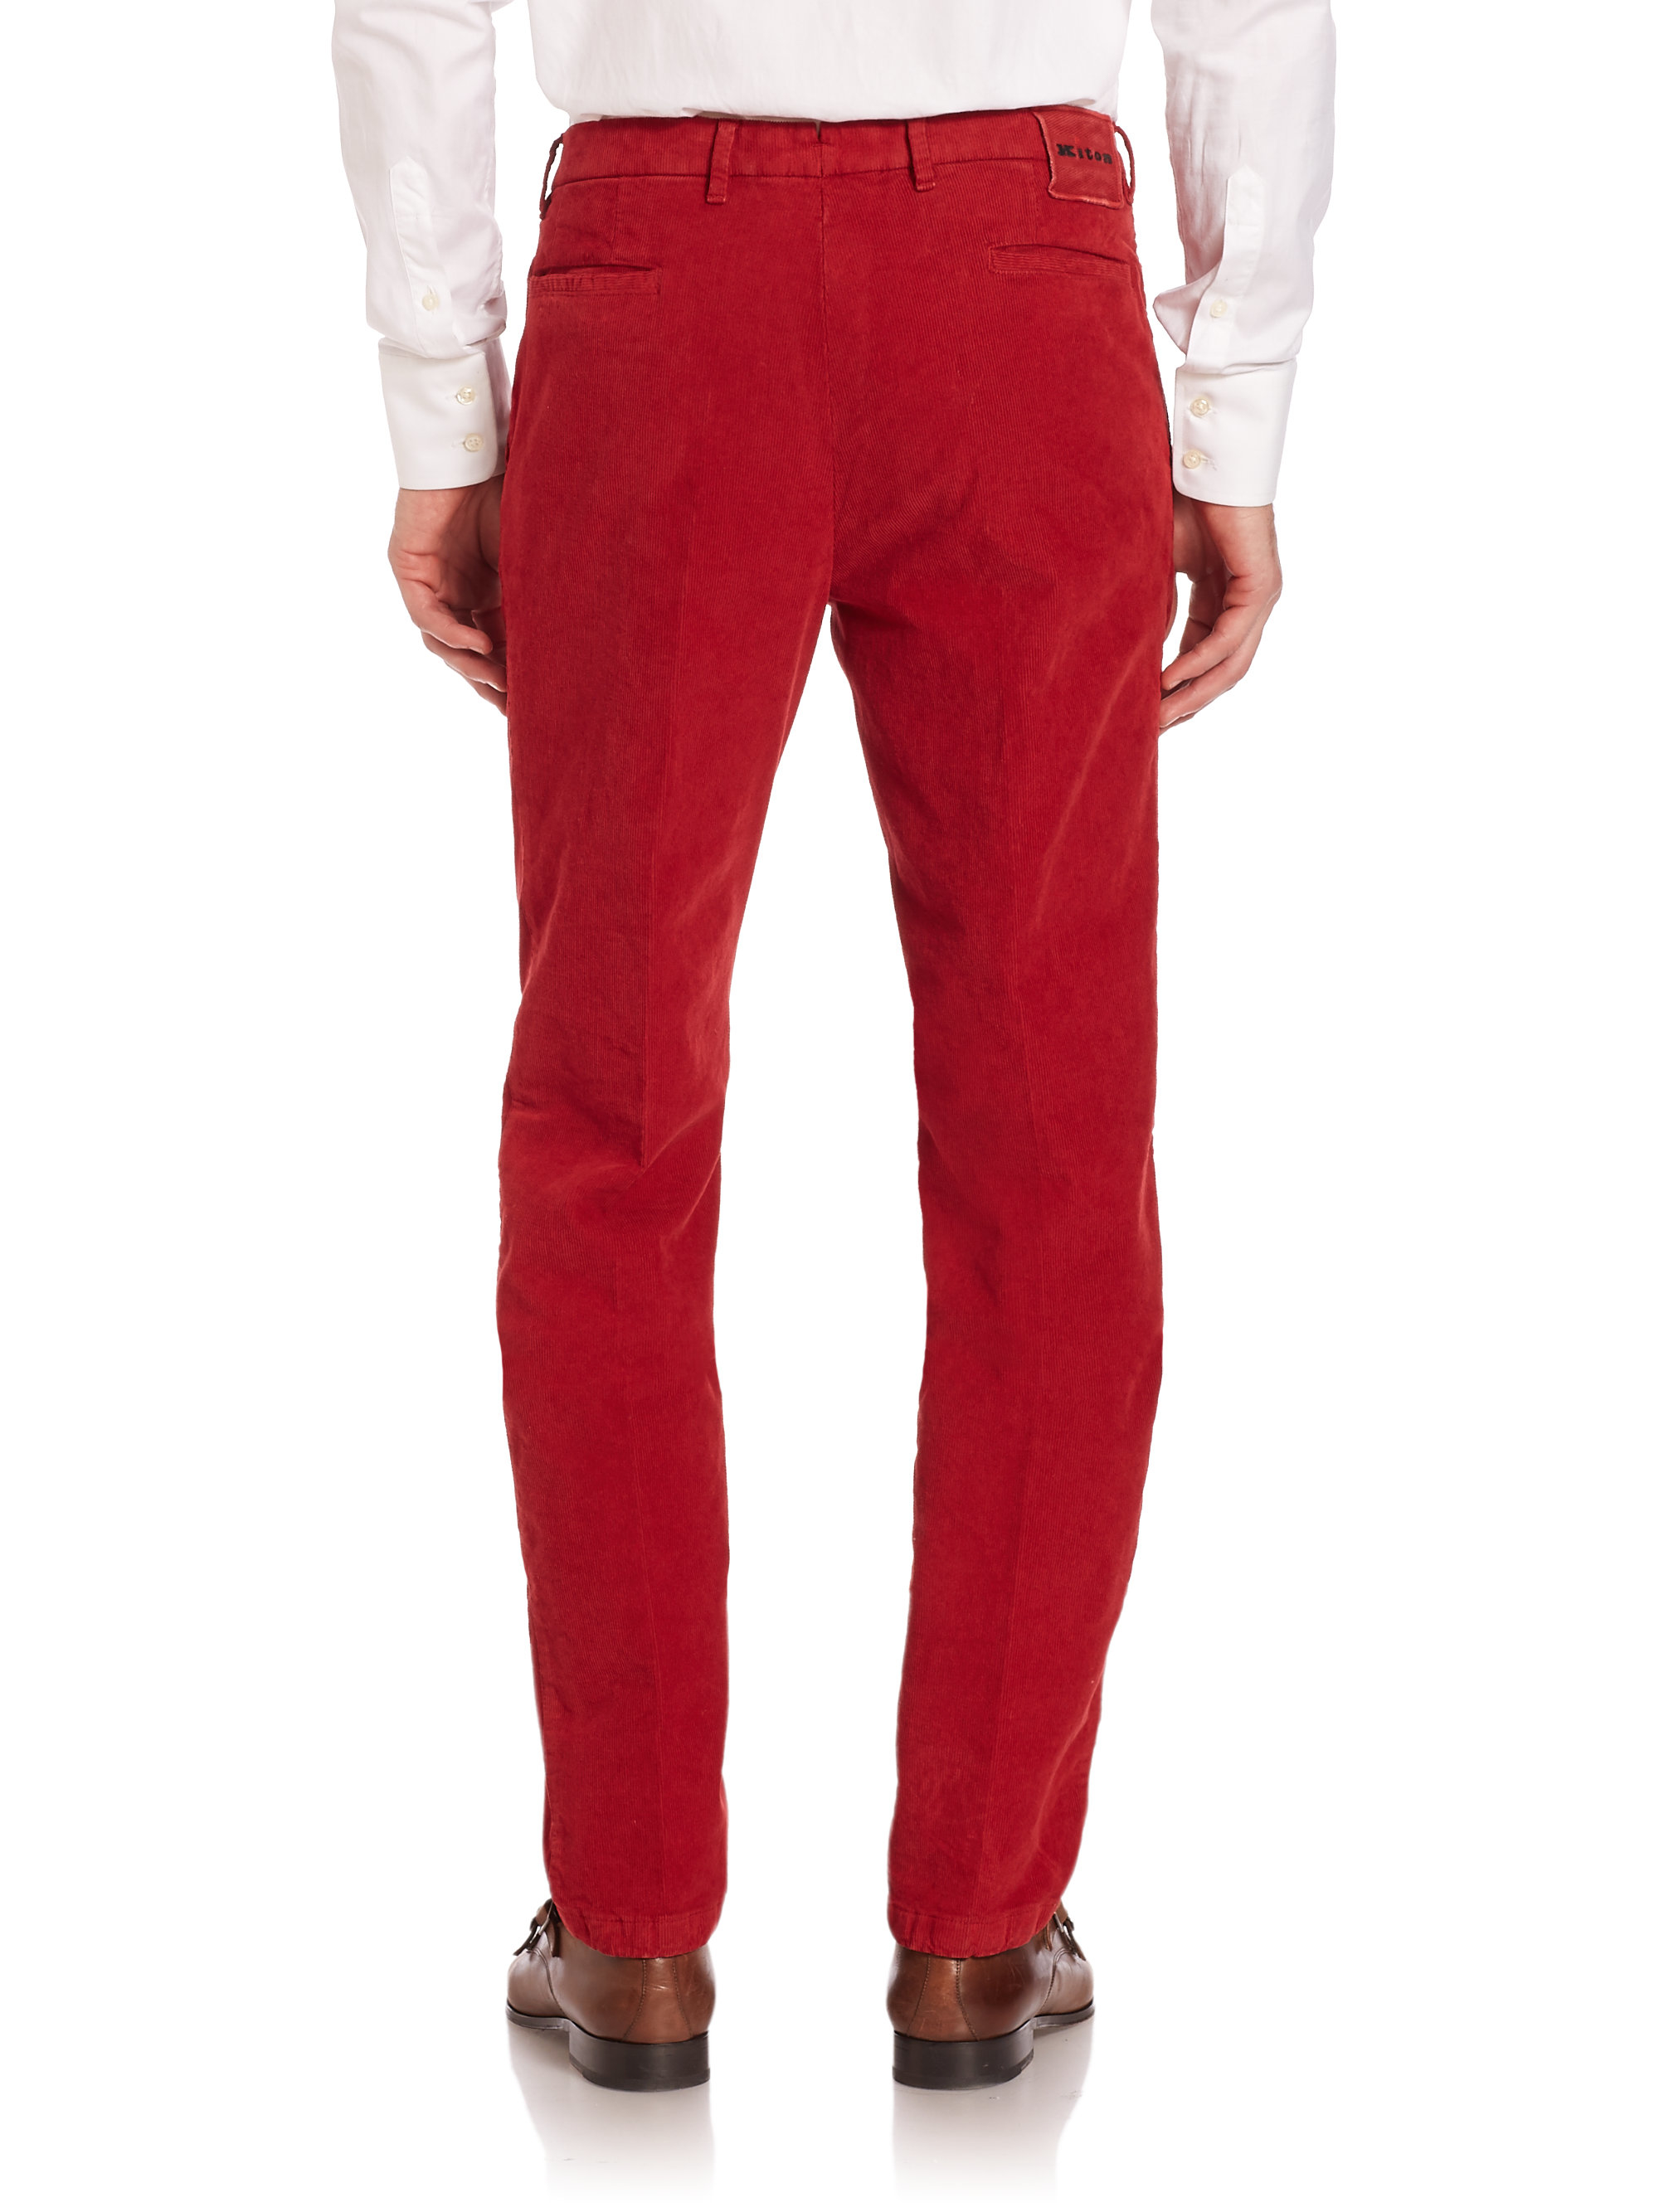 Lyst - Kiton Corduroy Pants in Red for Men